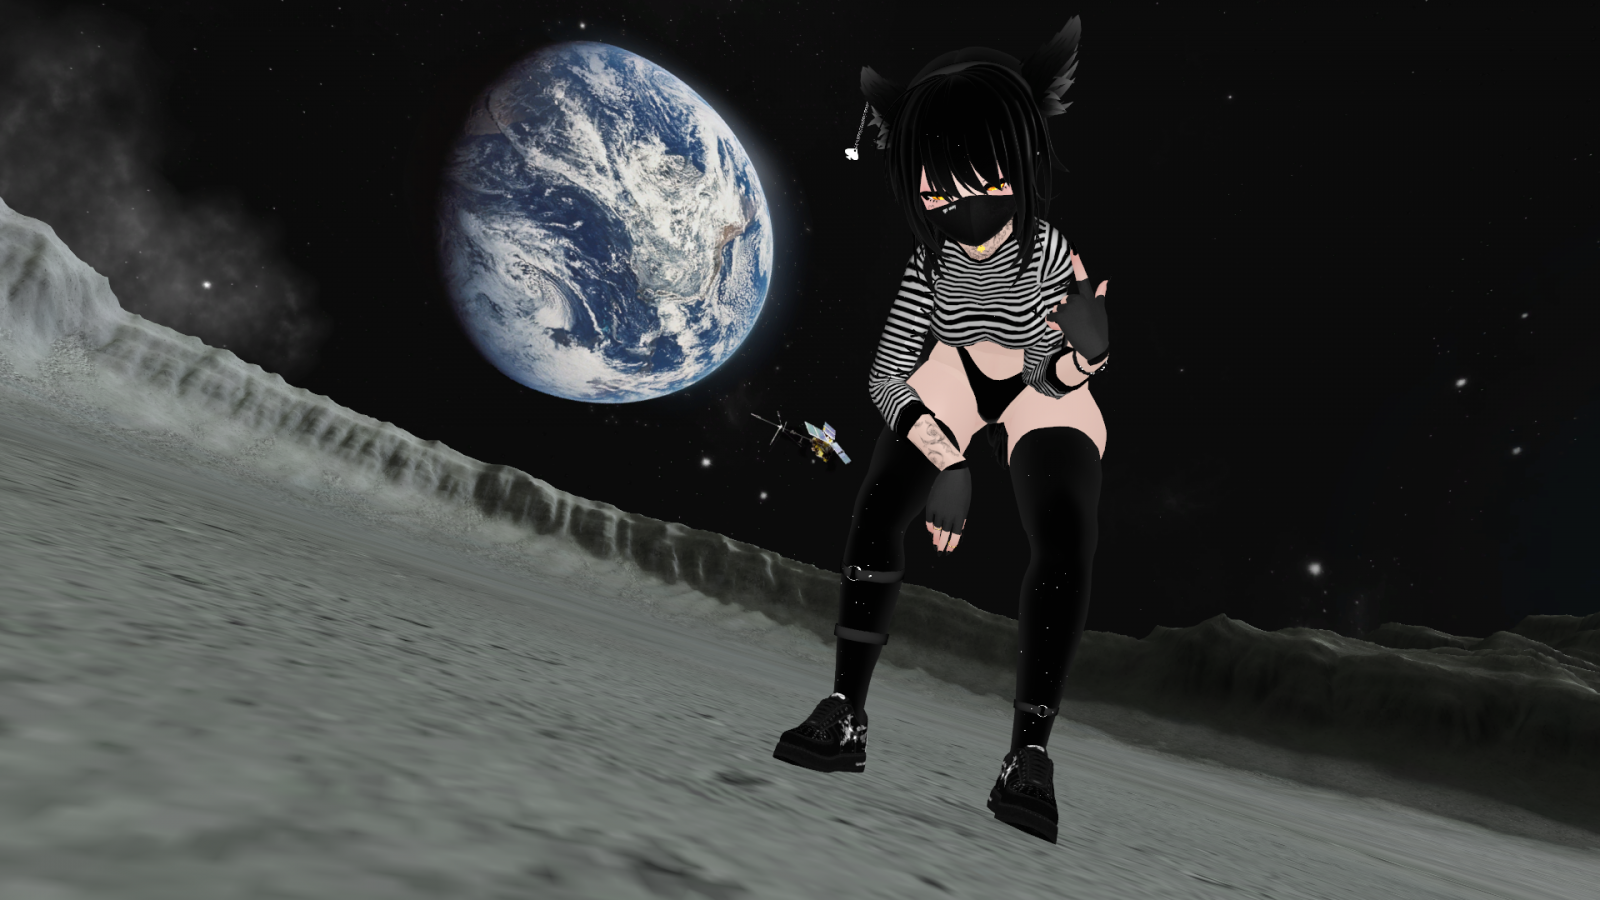 VRChat_1920x1080_2021-05-29_17-07-42.542.png